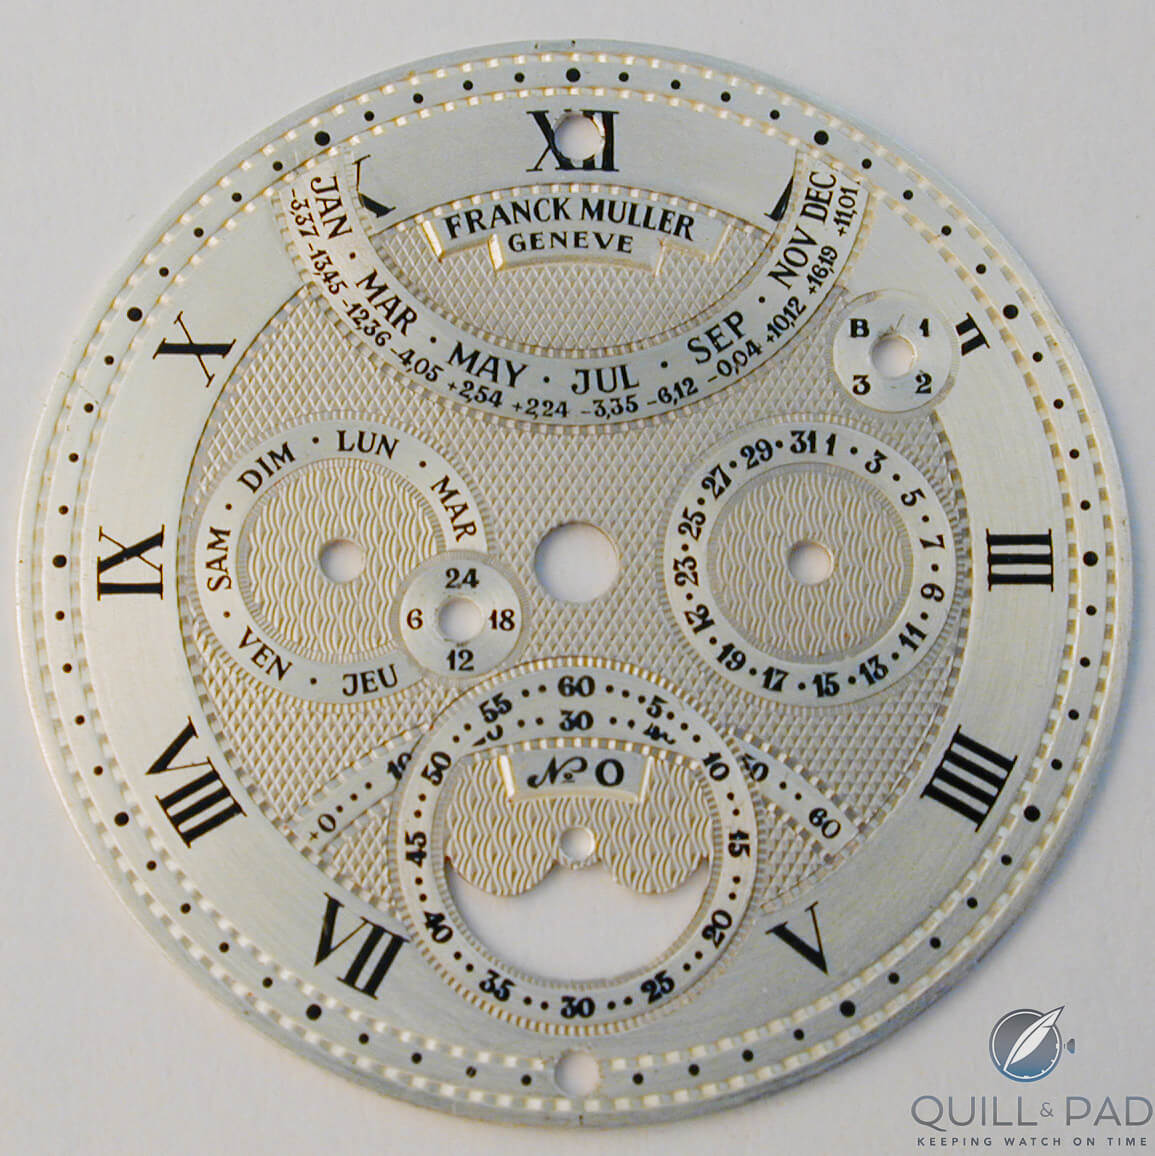 The magnificent dial of the Superbia Humanitatis